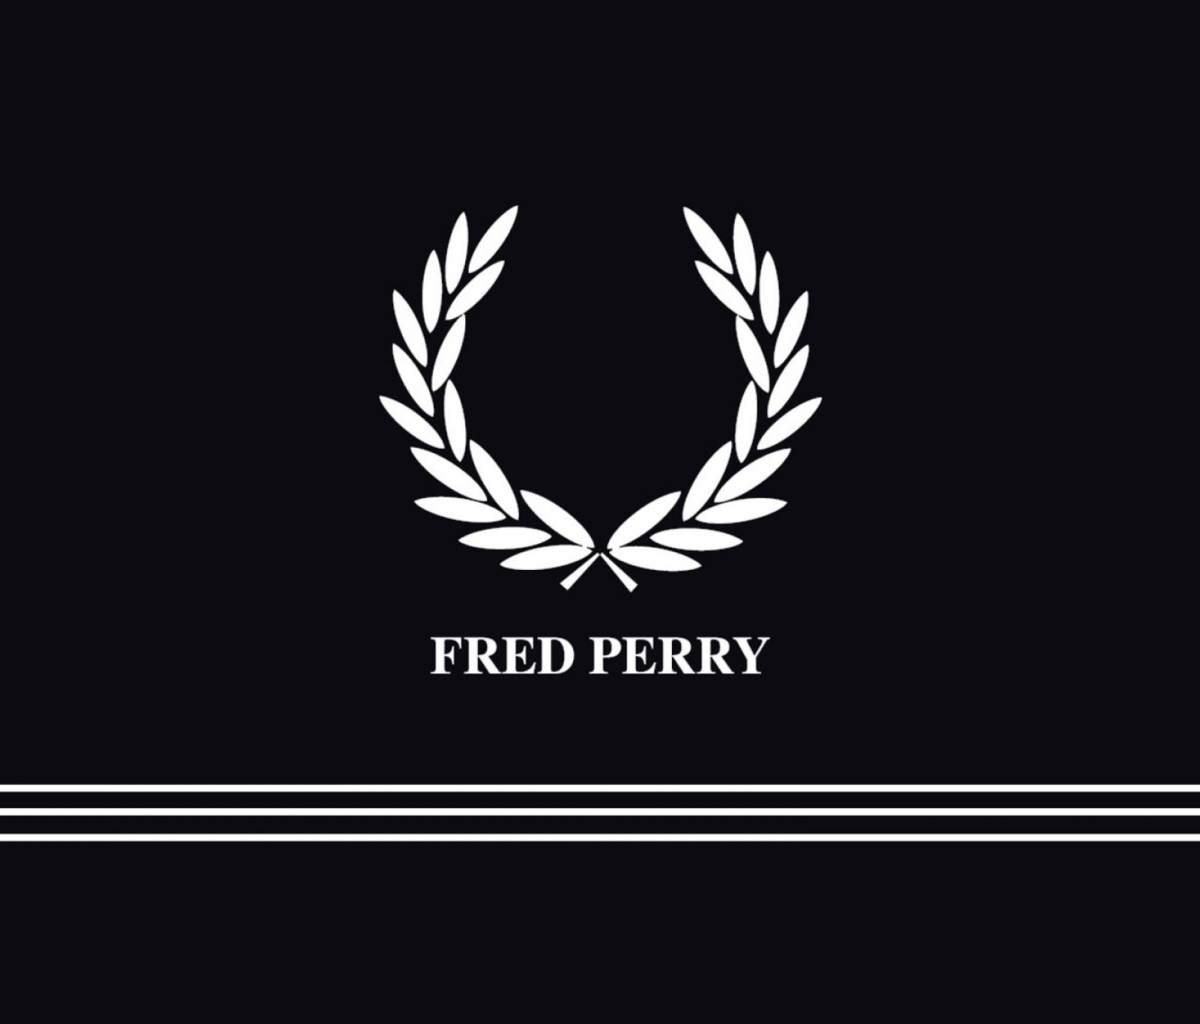 Fred Perry wallpaper 1200x1024